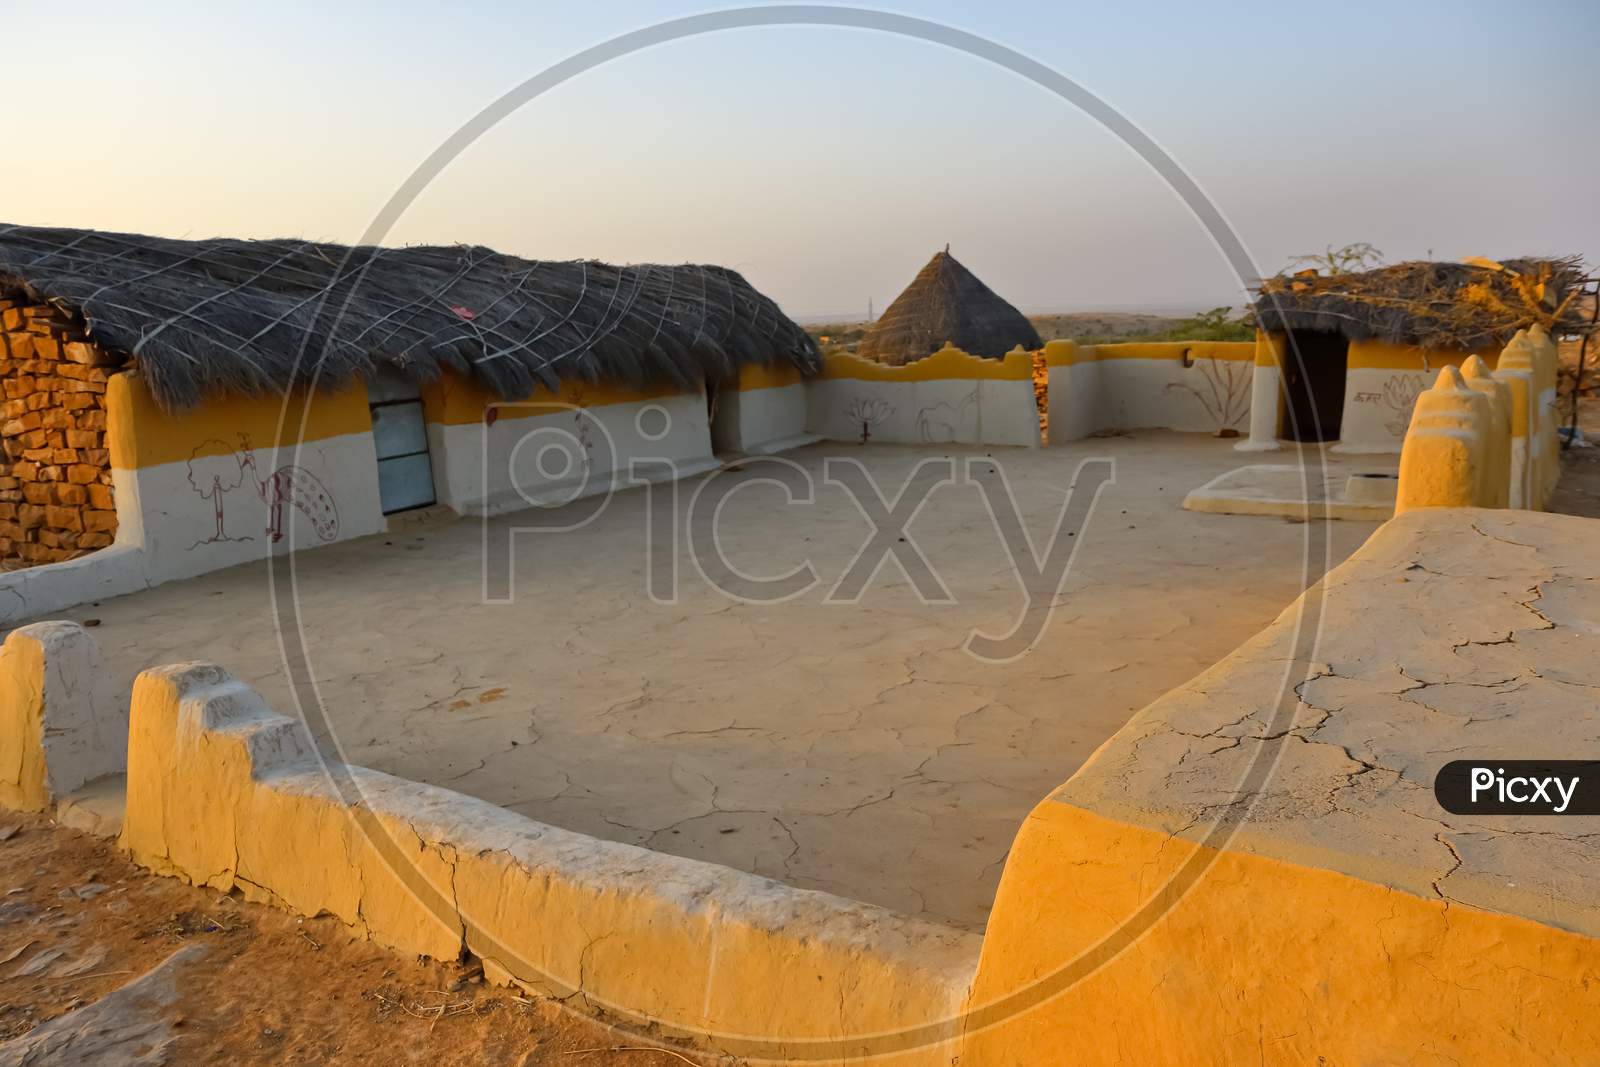 image of a mud house with thatched roof in an village in Rajasthan India